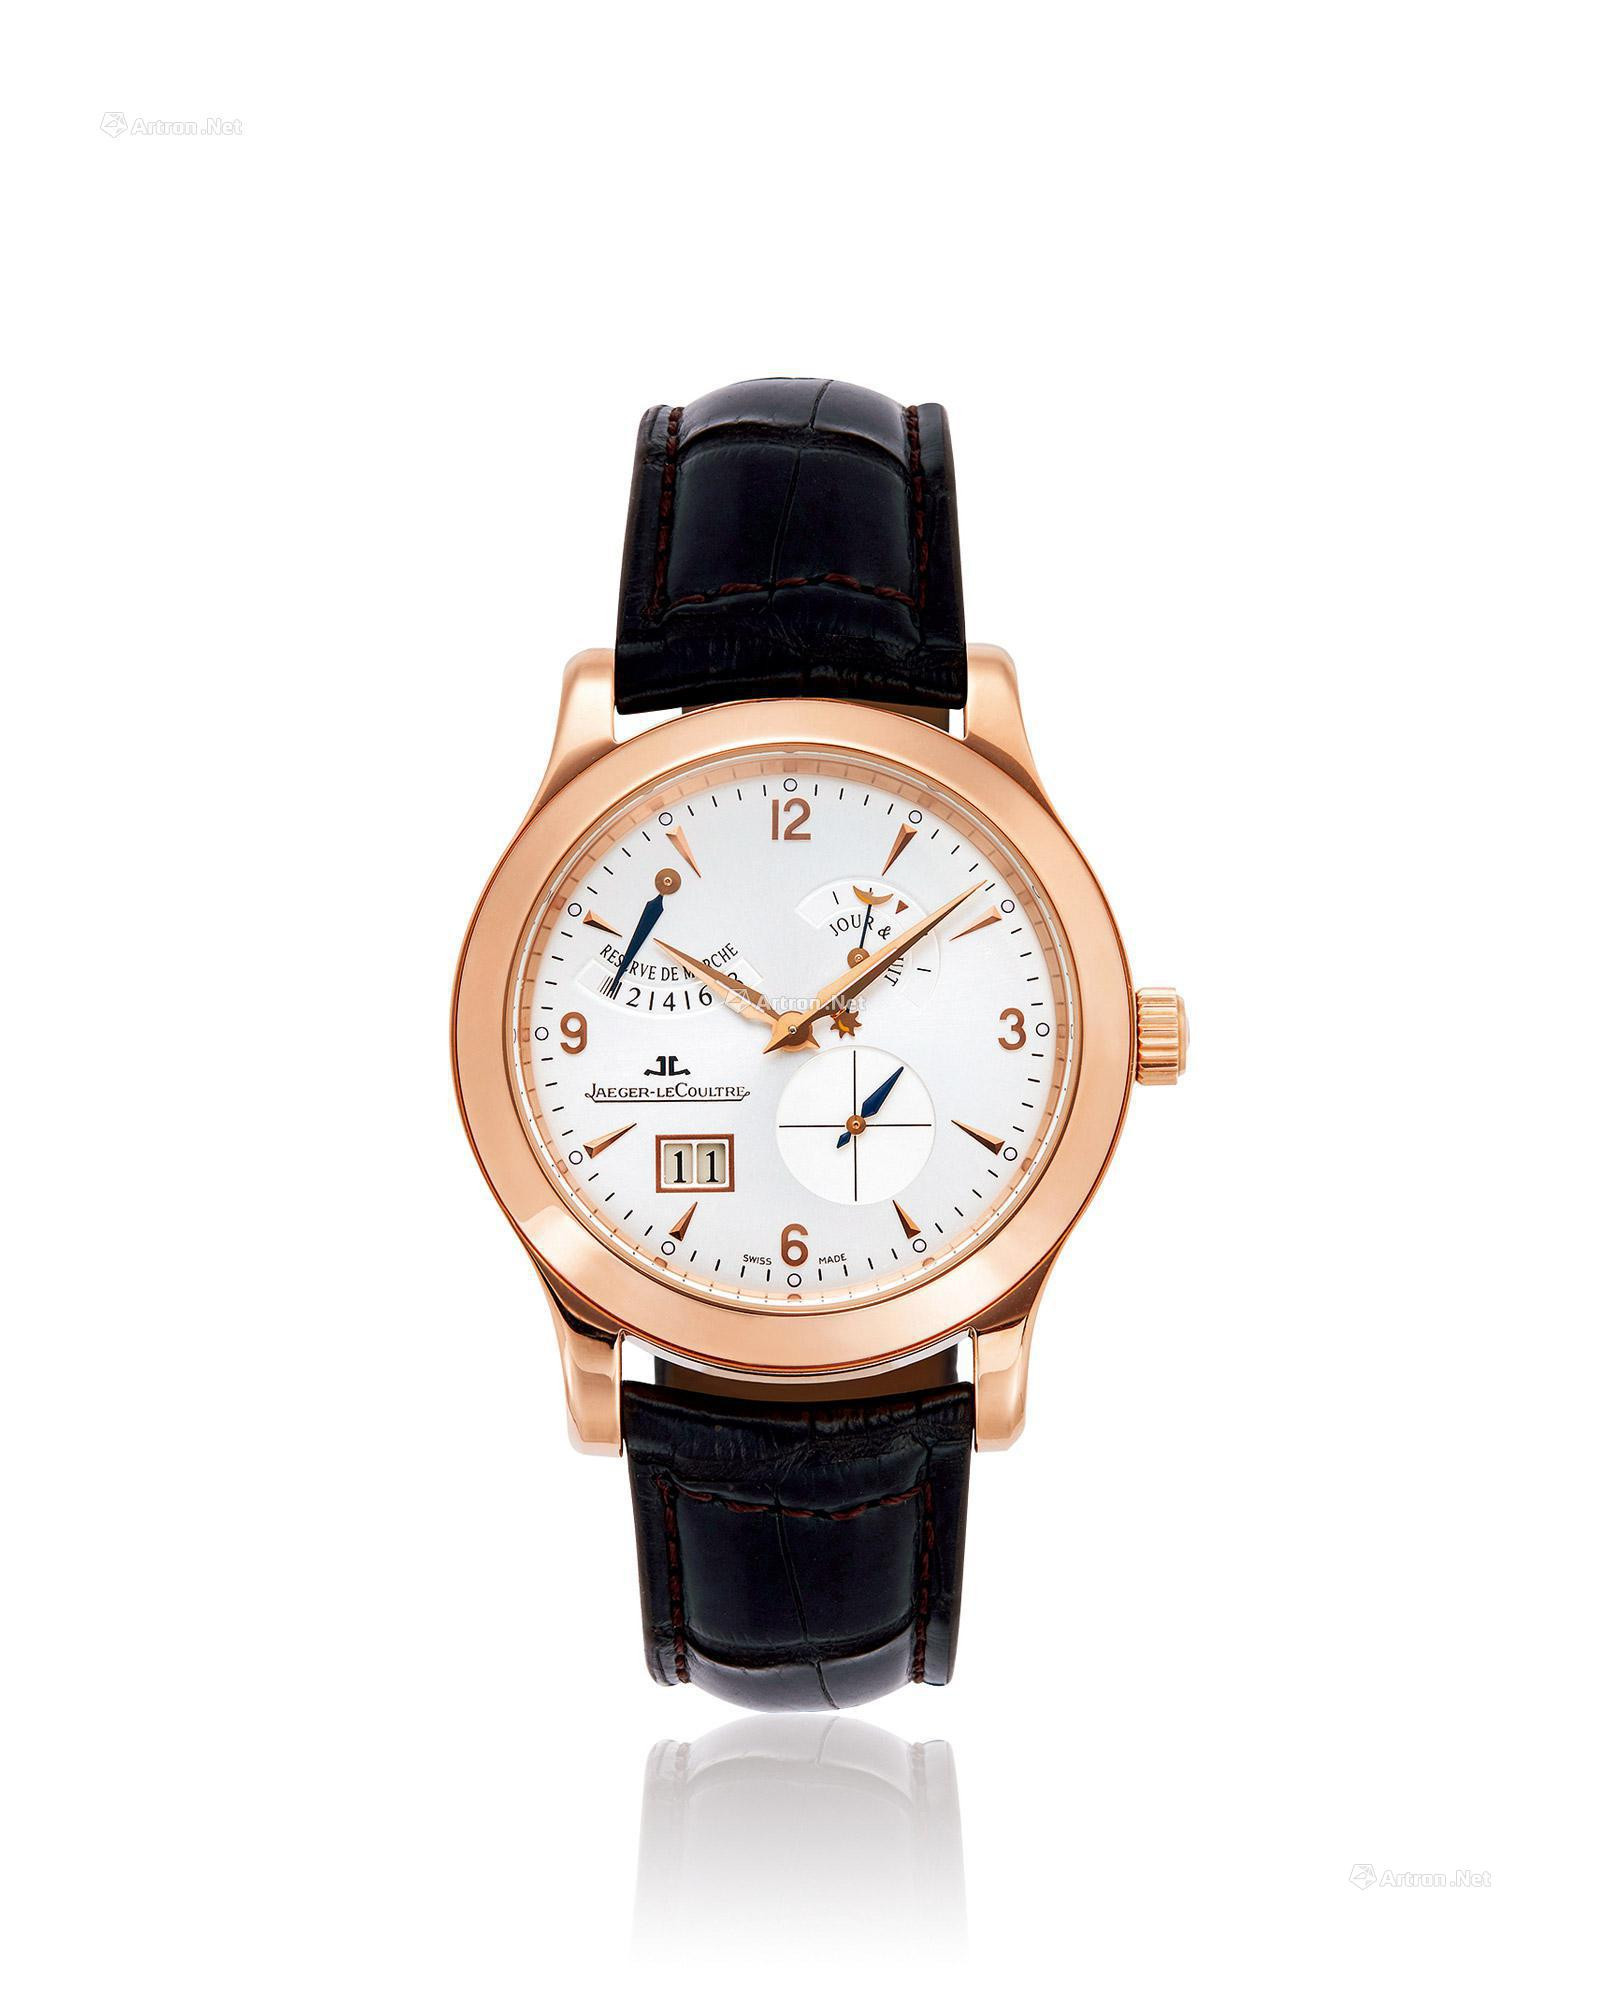 JAEGER-LECOULTRE  A FINE ROSE GOLD MECHANICAL WRISTWATCH， WITH 8-DAY POWER RESERVE， SMALL SECONDS， DATE，  DAY/NIGHT INDICATIOR AND ORIGINAL PRESENTATION BOX